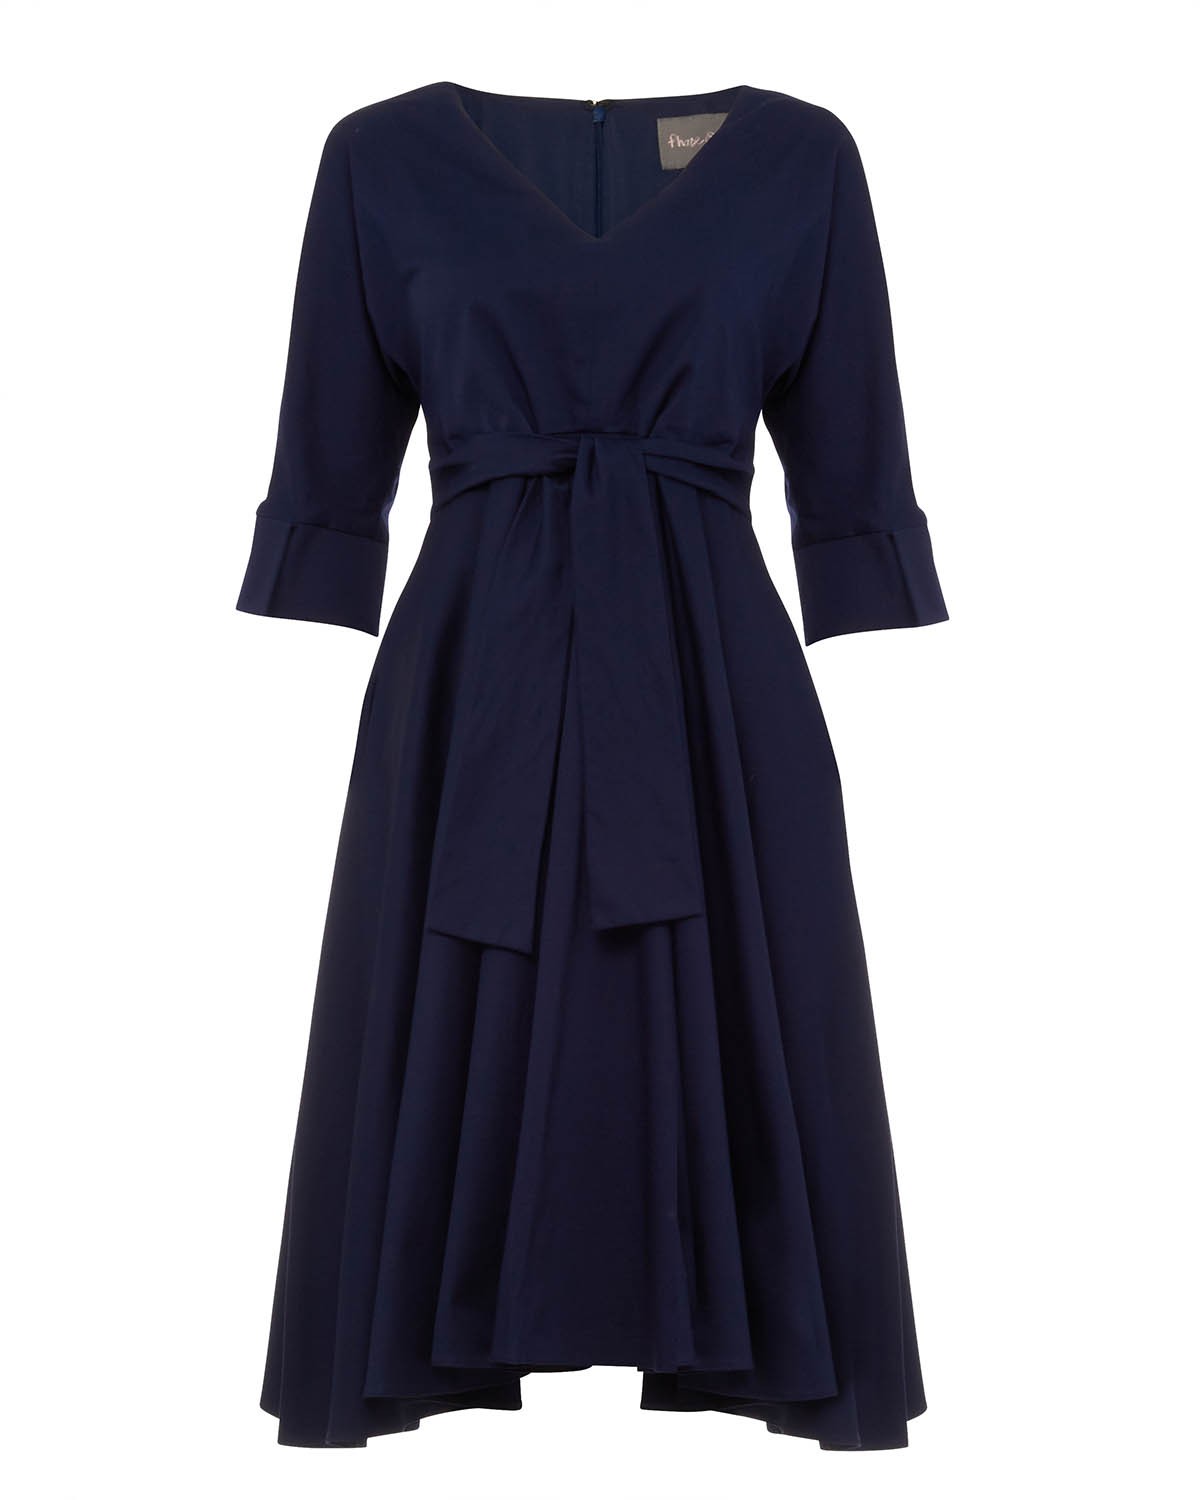 Phase Eight Navy Dresses Taylor Tie Front Dress